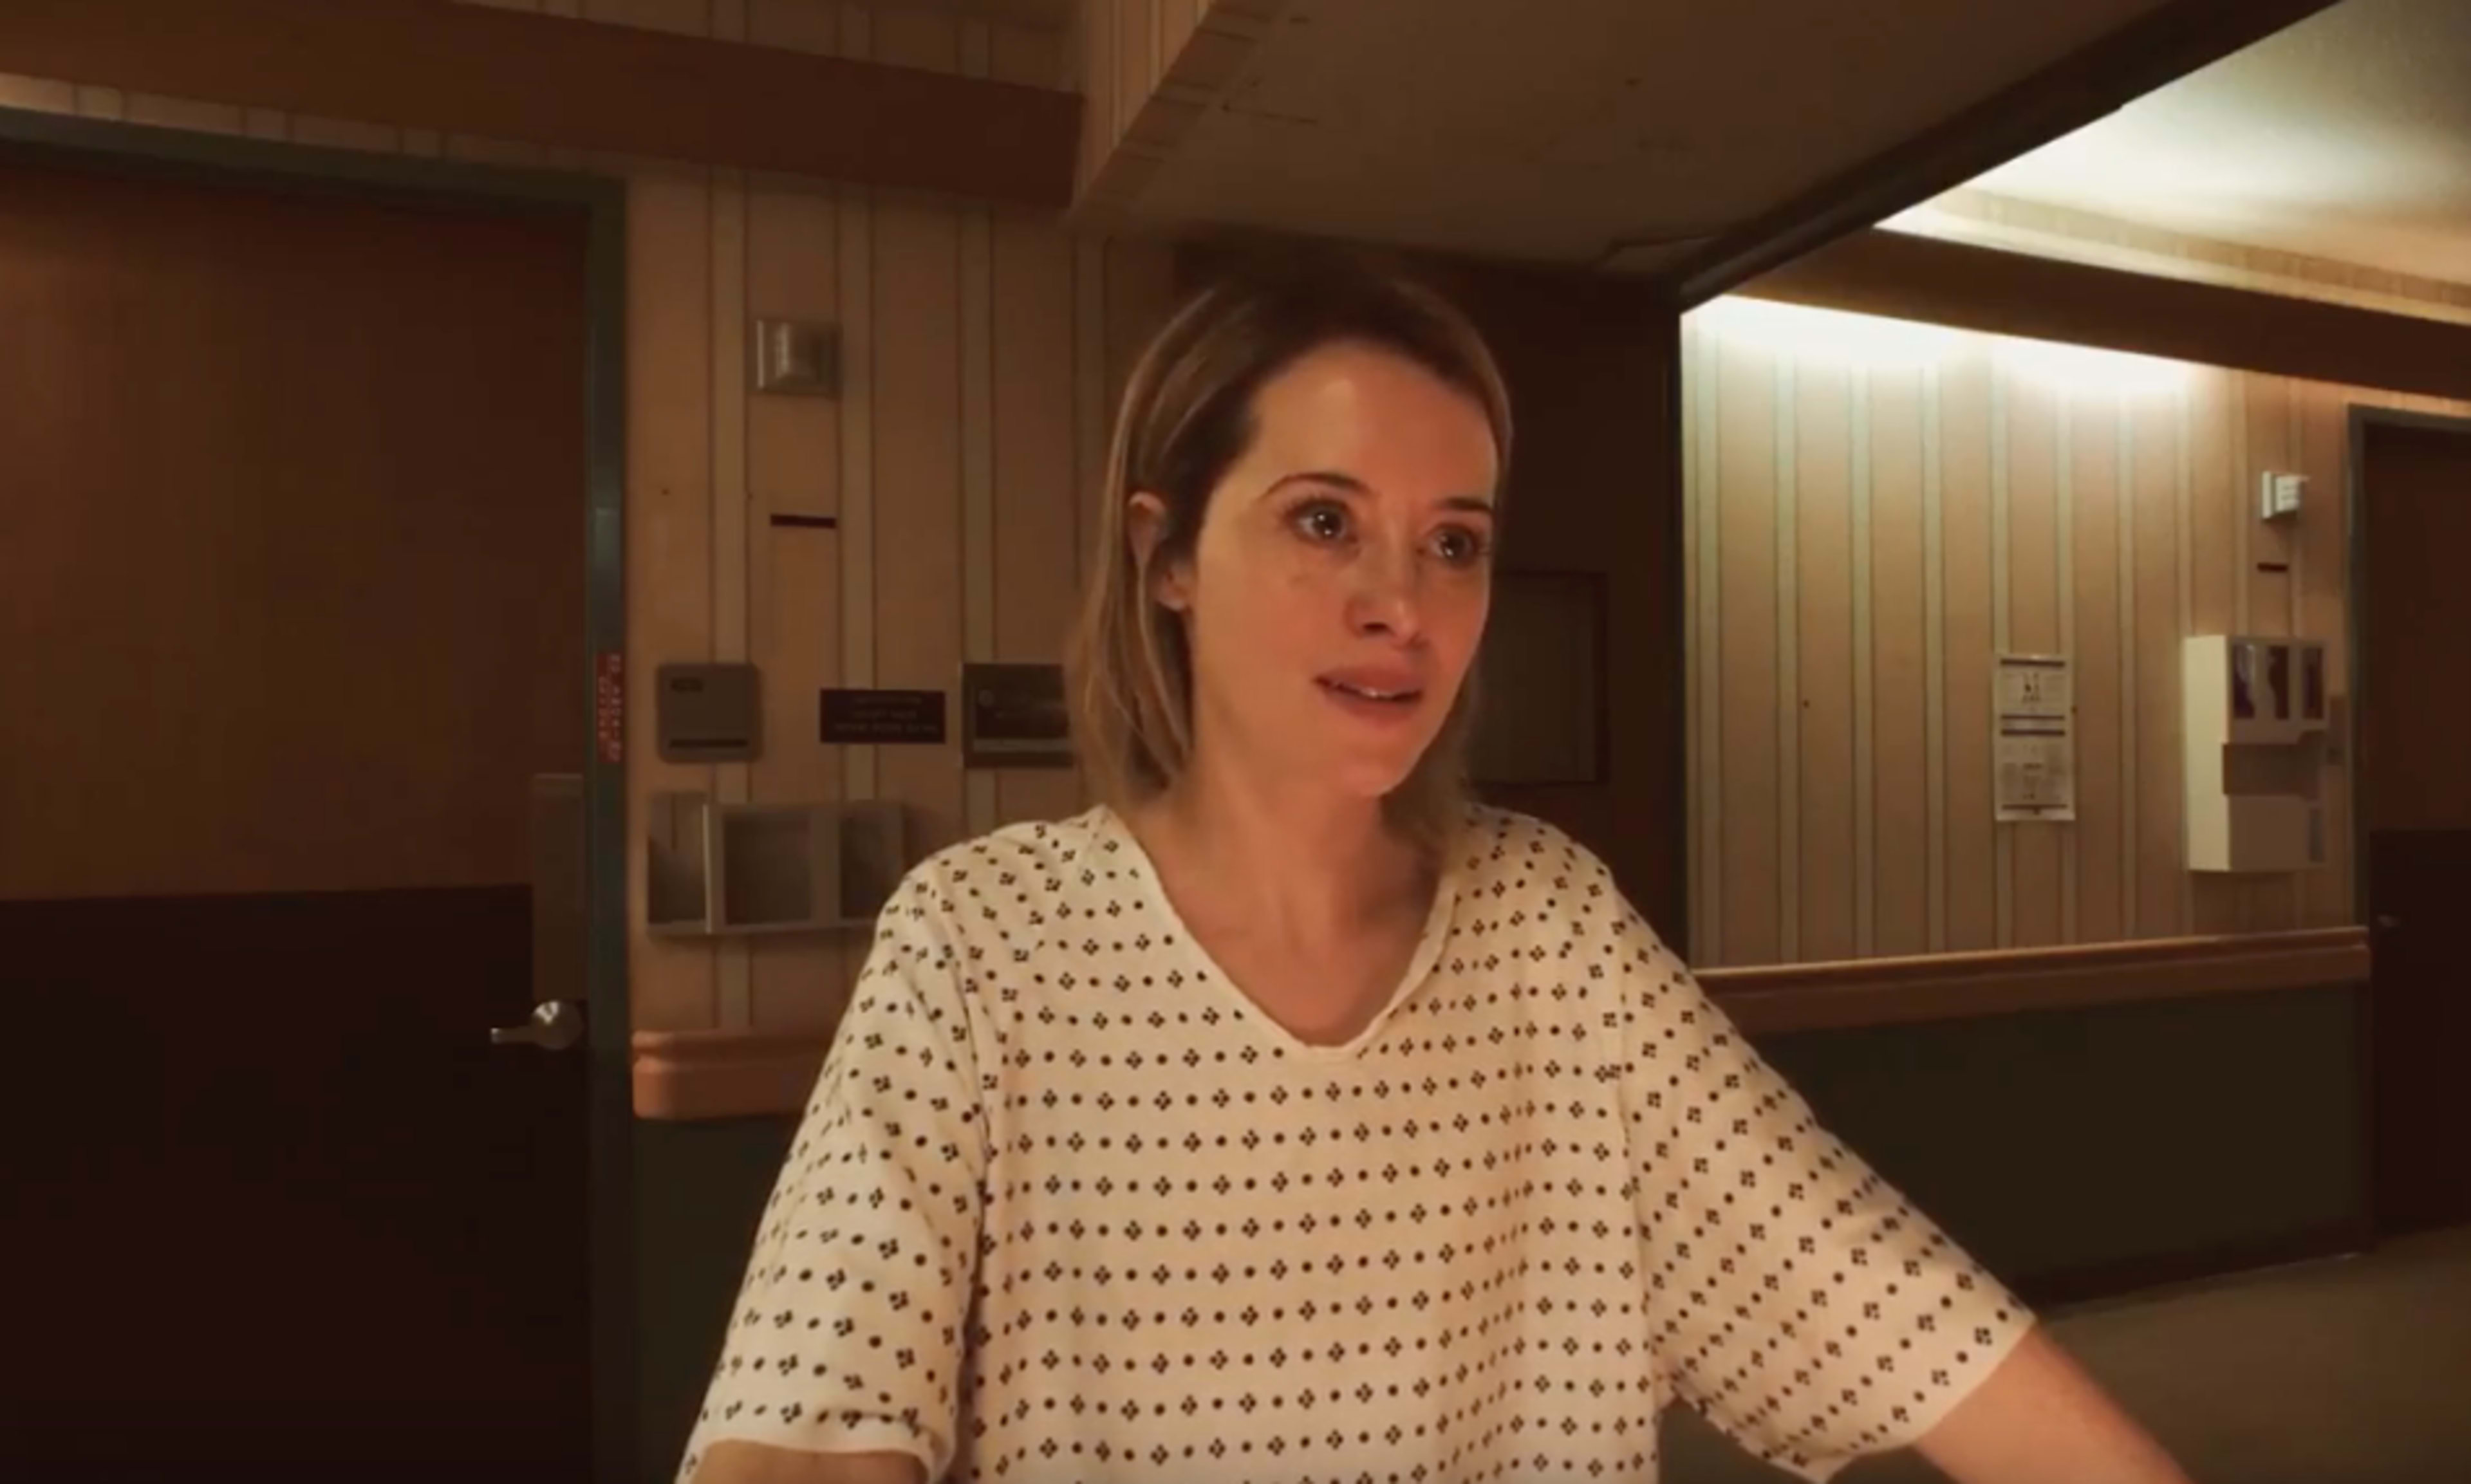 Watch The First Trailer For Steven Soderbergh’s iPhone-Shot Film “Unsane”